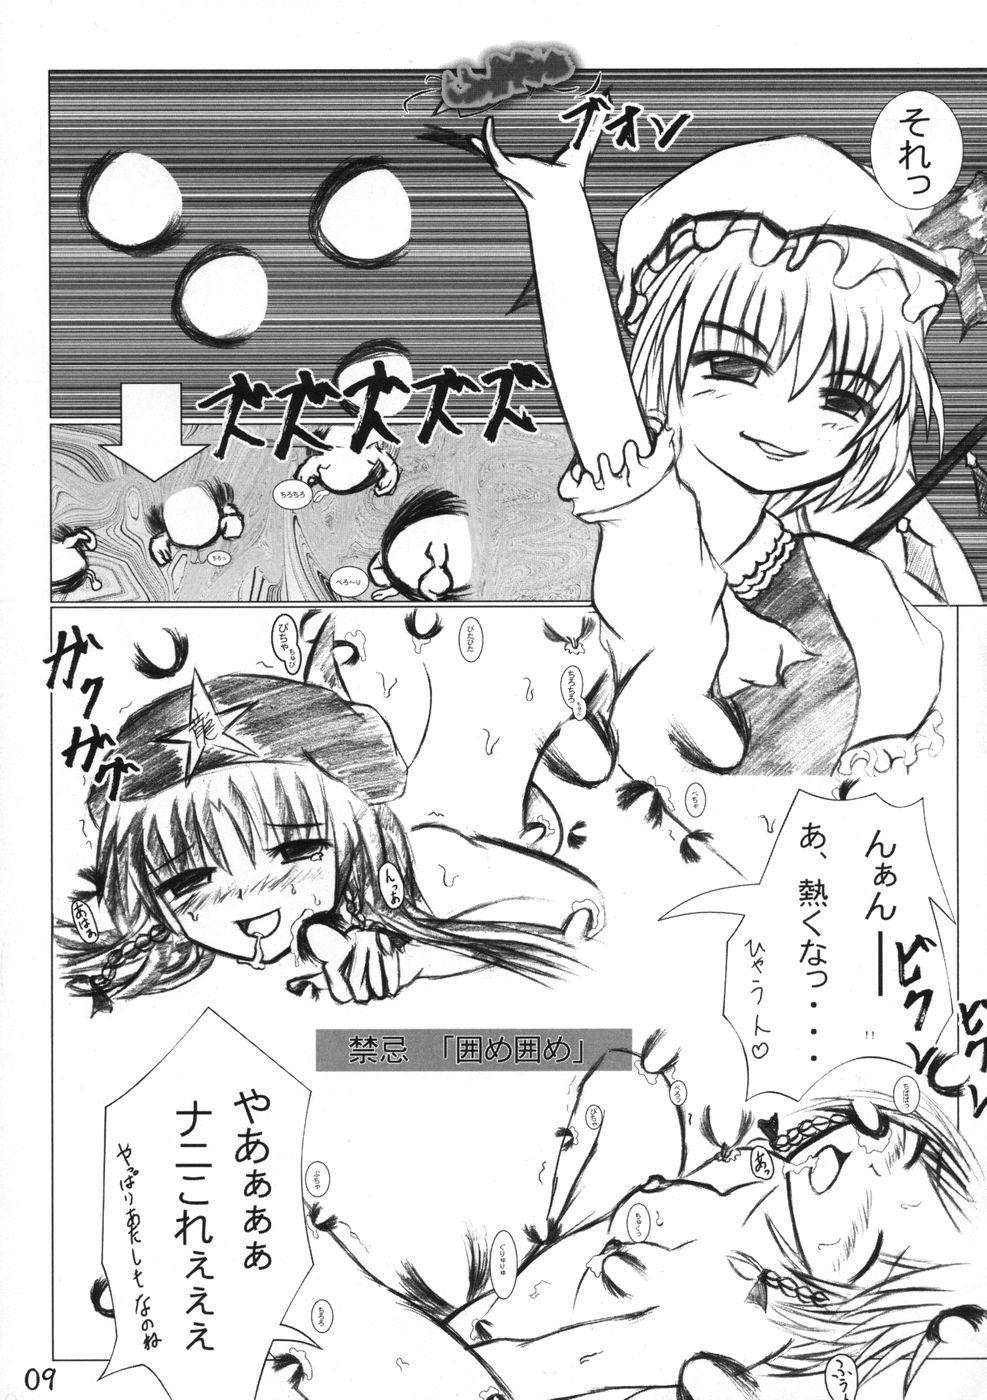 Bed 業創りし風 - Touhou project Gostoso - Page 9